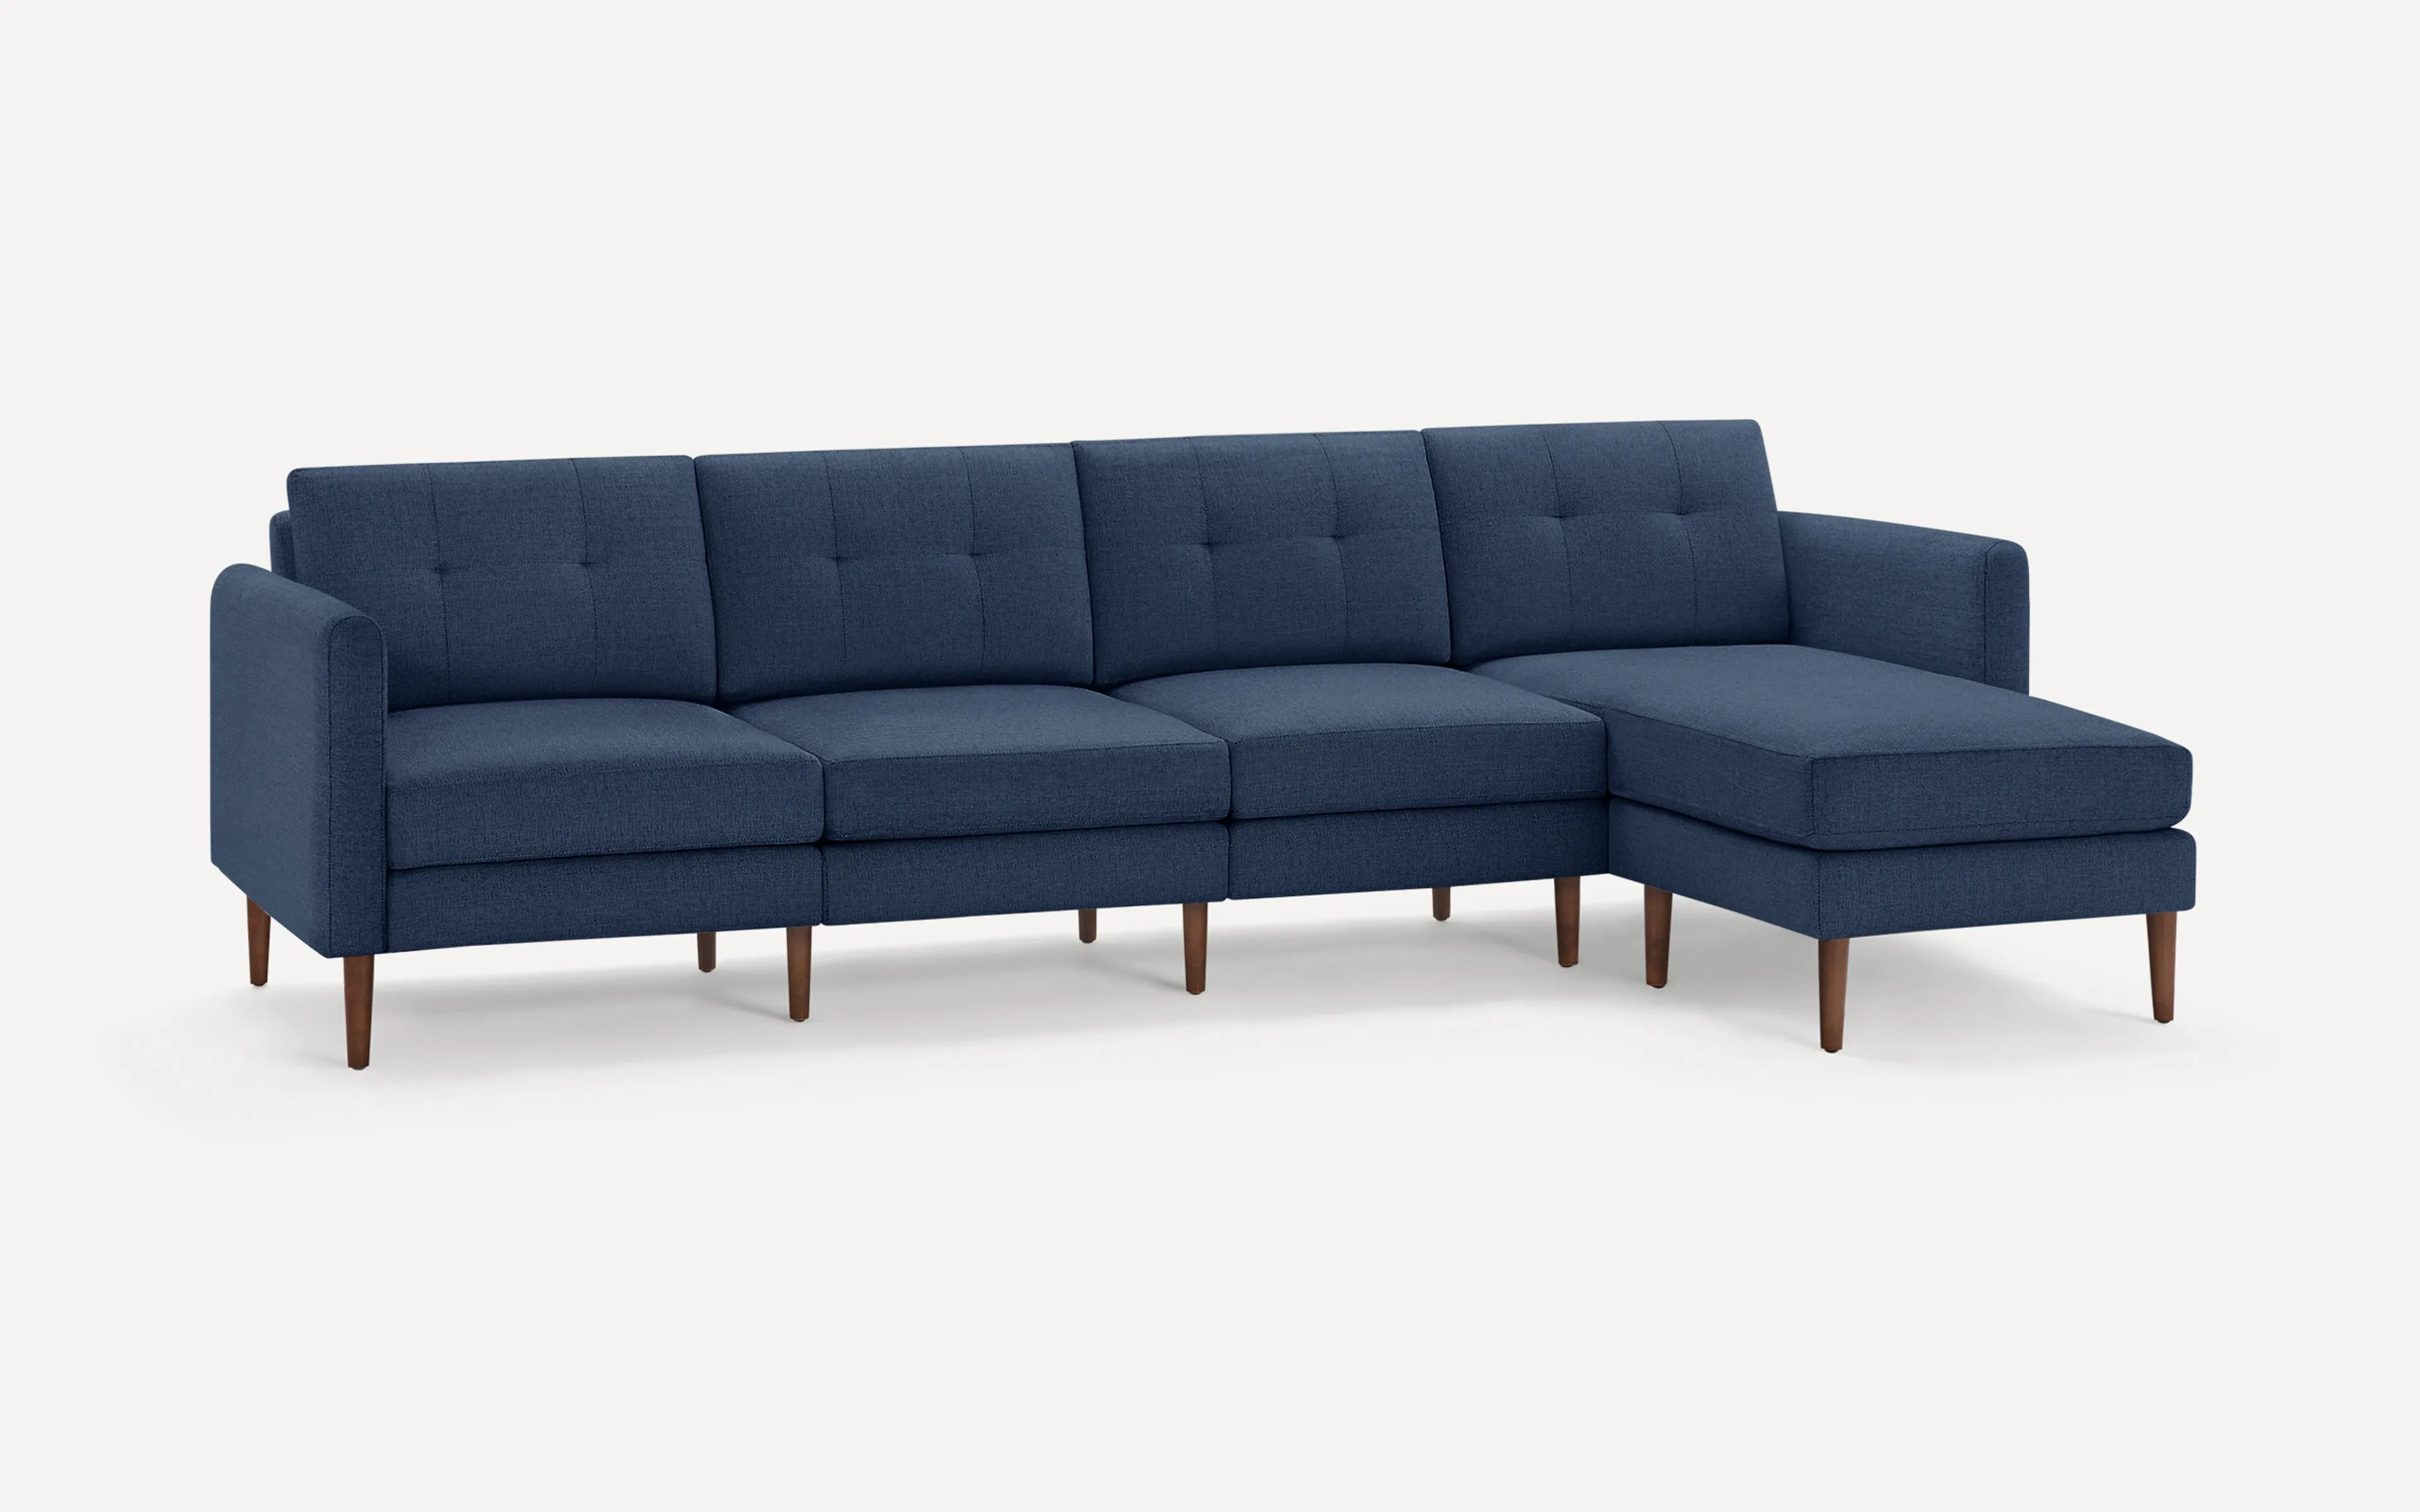 Original Nomad Chaise King Sofa in Navy Blue Fabric